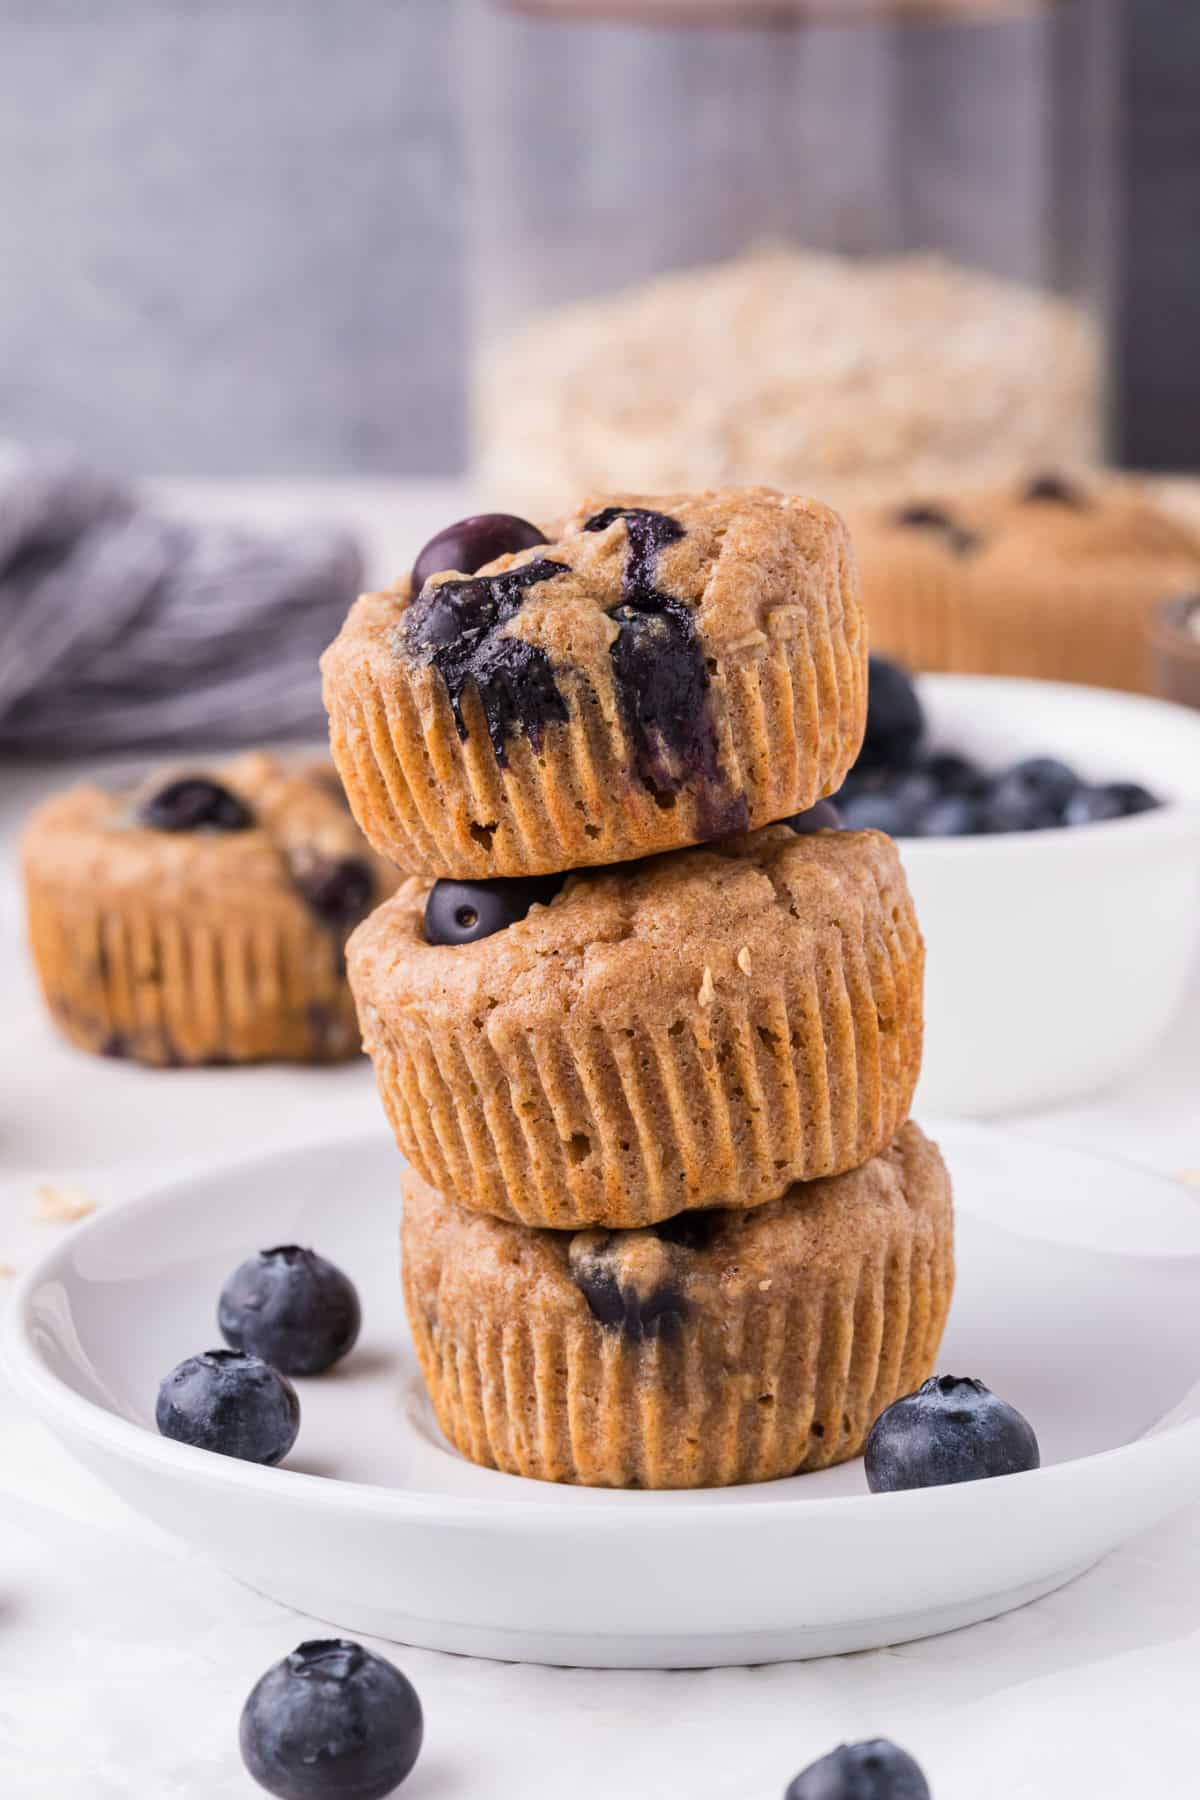 Stack of three blueberry muffins.